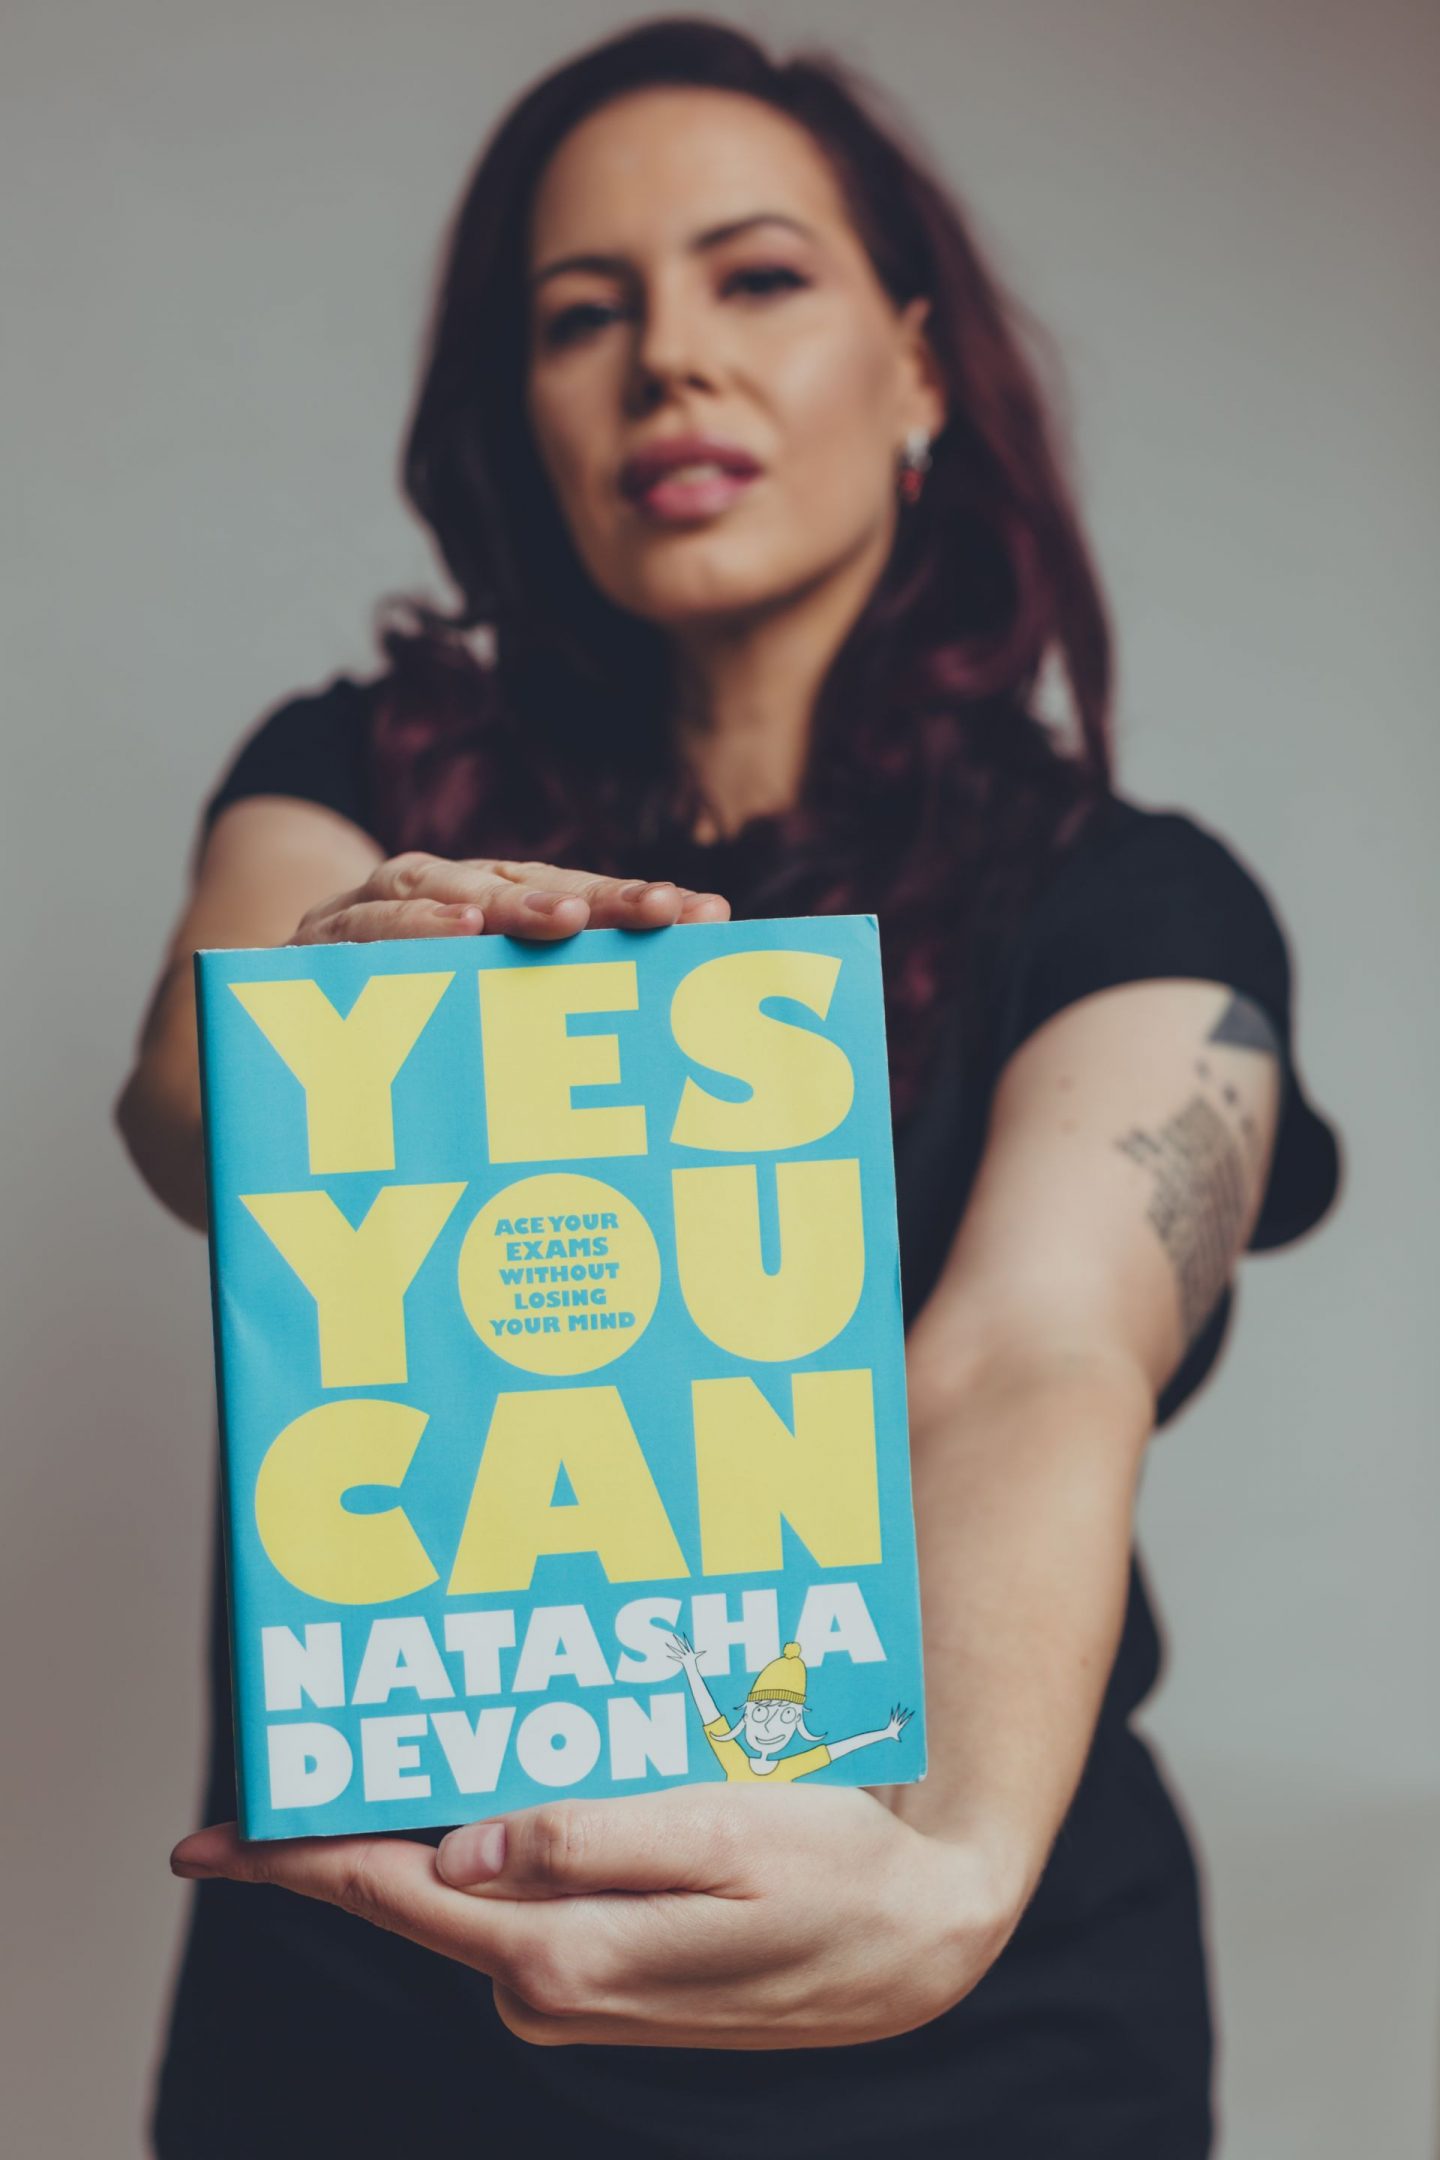 Natasha Devon with her book, Yes you Can Ace Your Exams Without Losing Your Mind